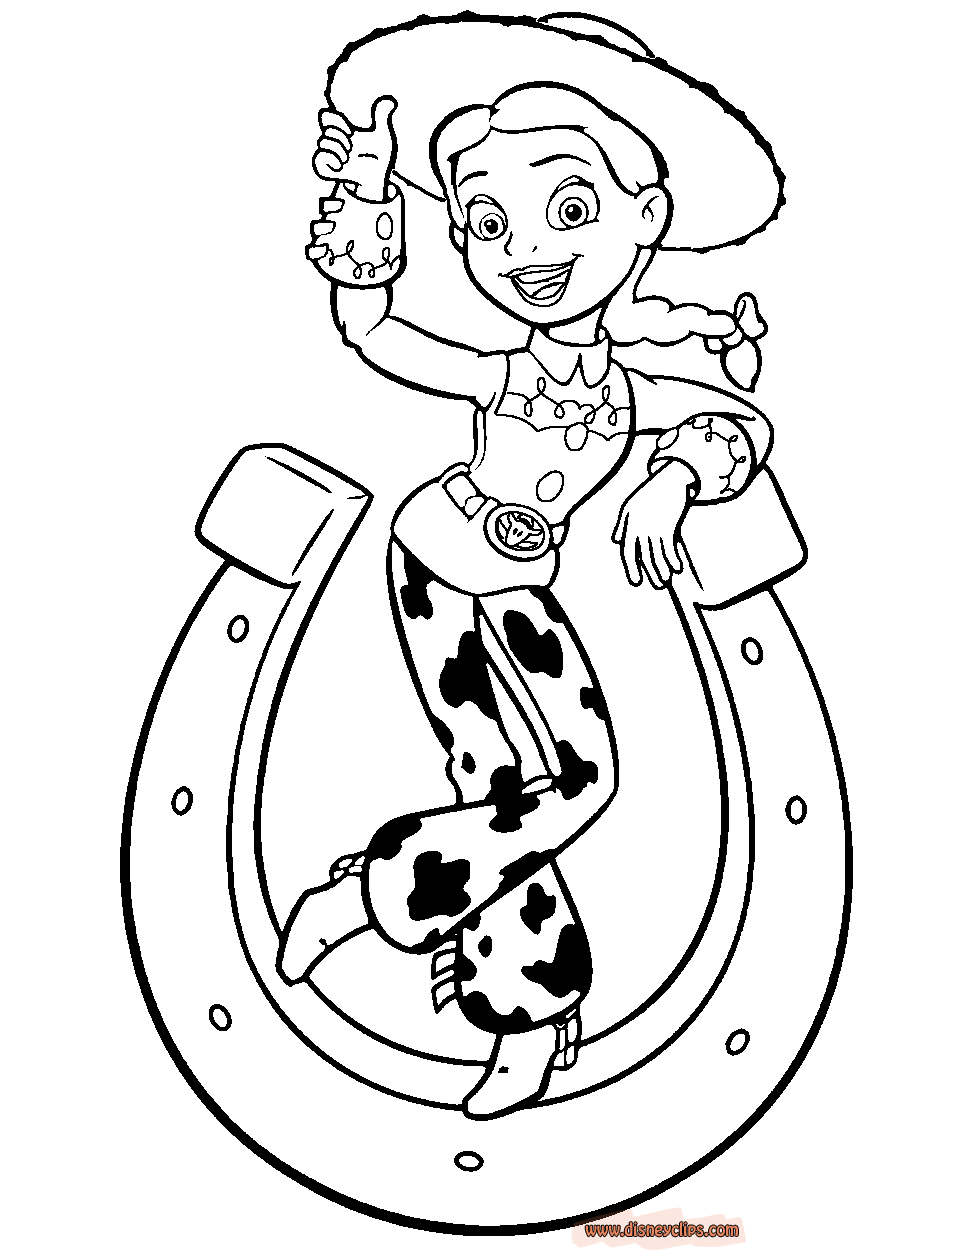 jessie toy story coloring pages how to draw jessie from toy story 2 step 8 jessie story coloring pages toy 